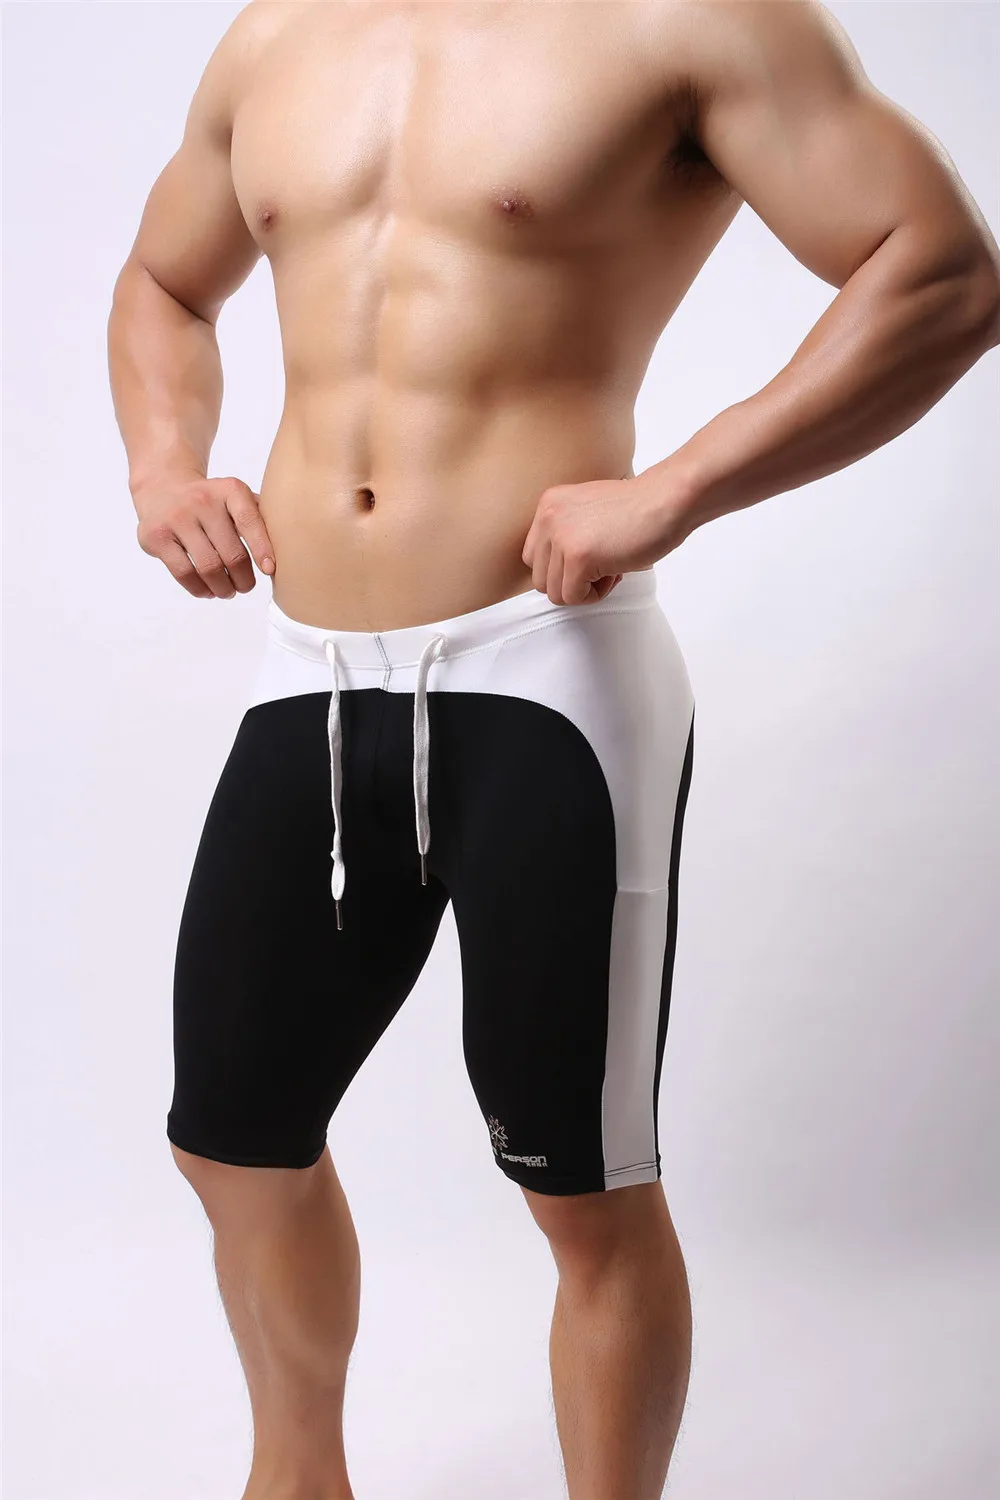 

BRAVE PERSON Summer Style Multi Breathable Men Tight casual Shorts Bodybuilding Solid Tights Trunks sexy Transparent Shorts